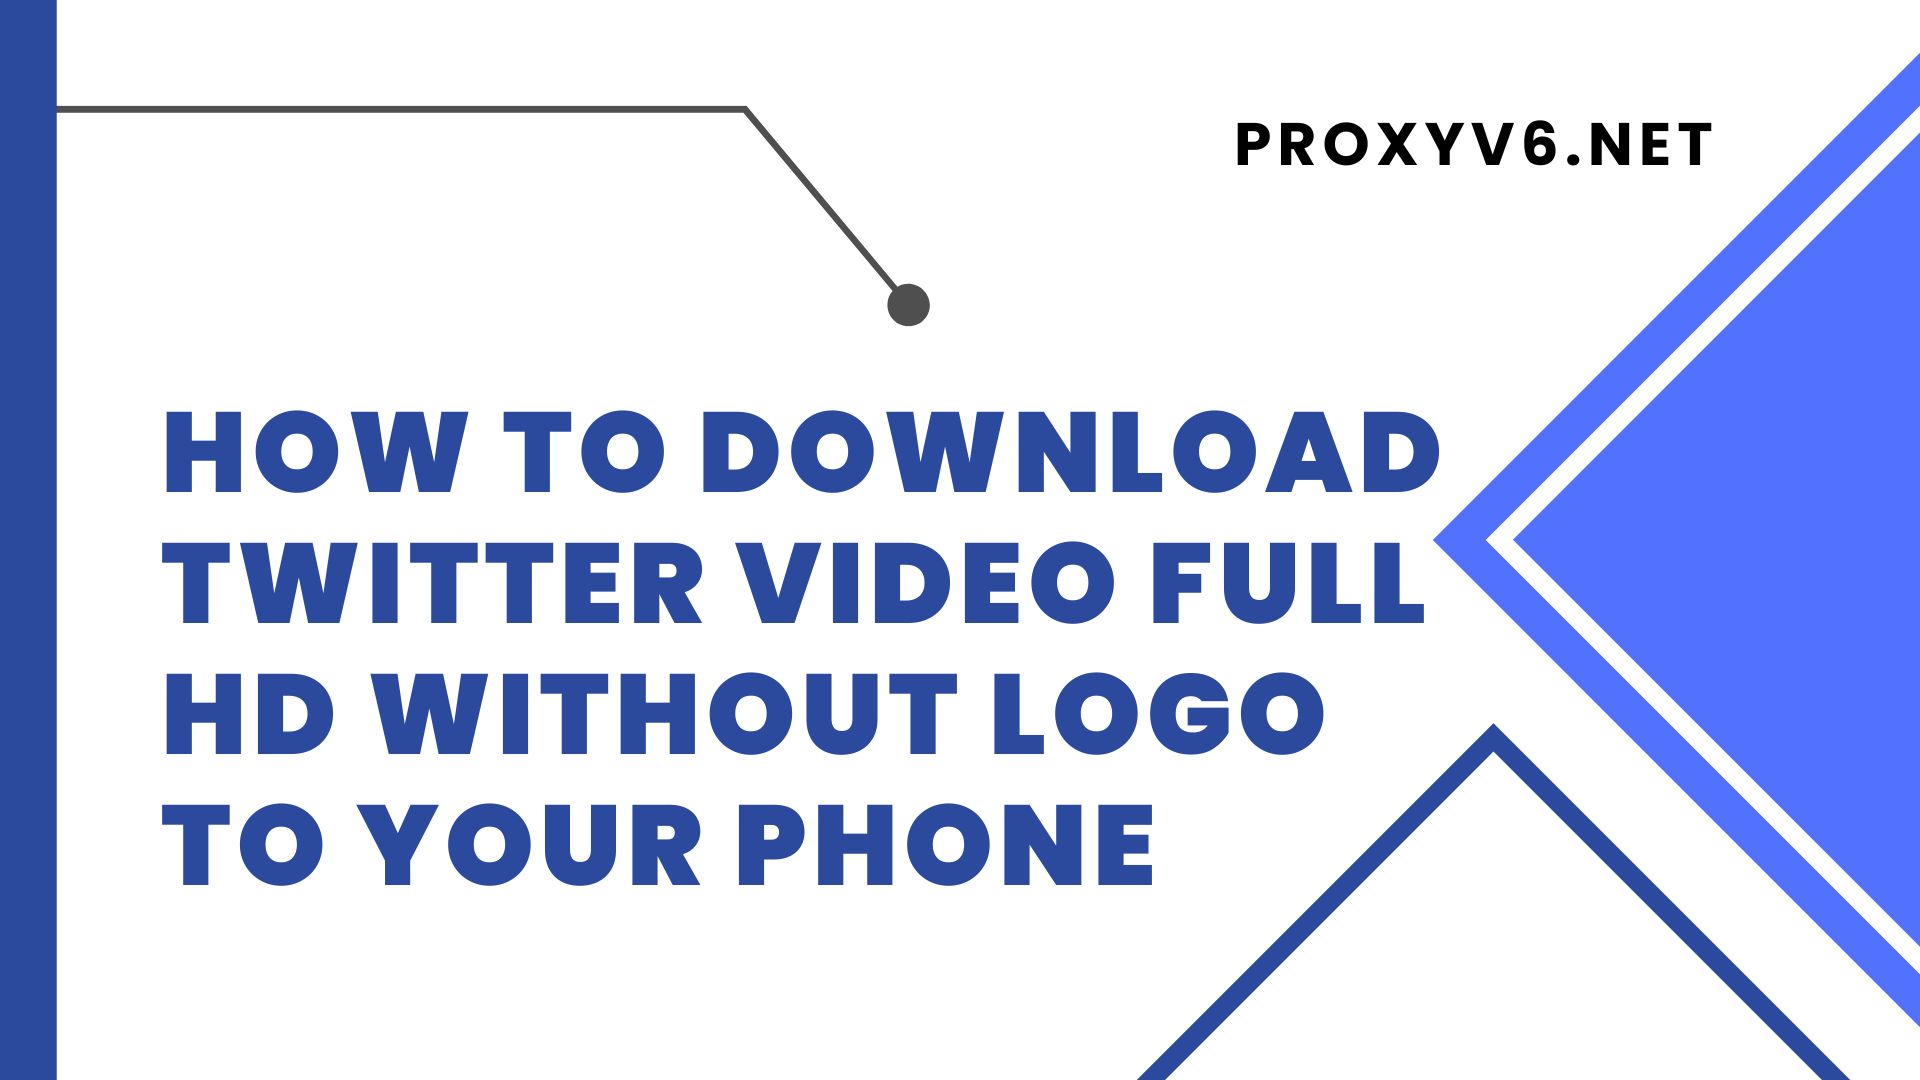 How to download twitter video full HD without logo to your phone?